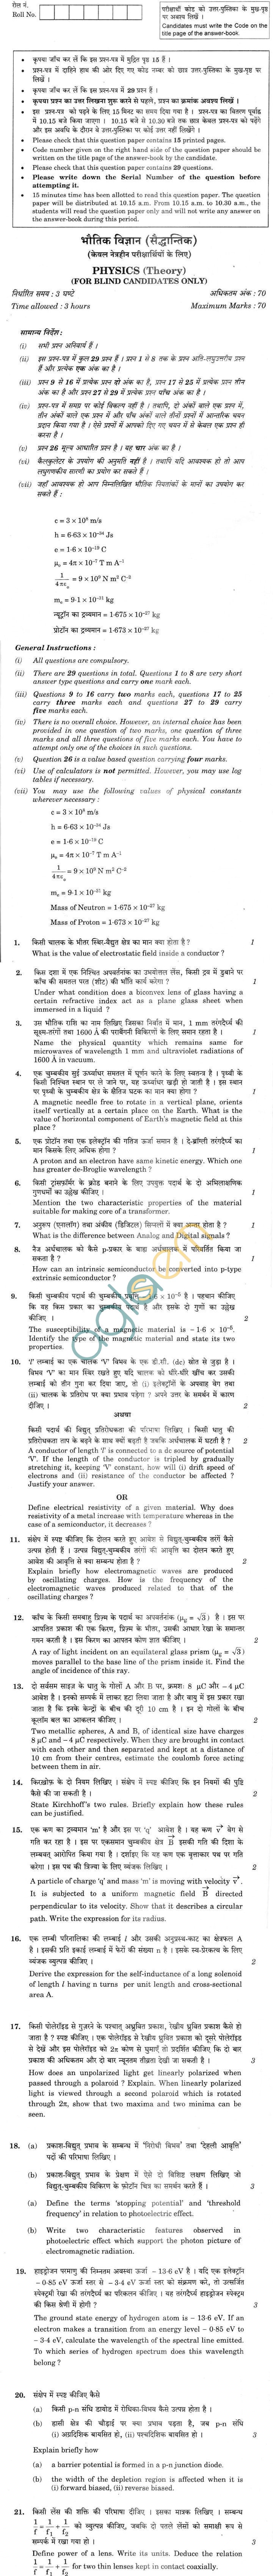 CBSE Compartment Exam 2013 Class XII Question Paper - Physics for Blind Candidate